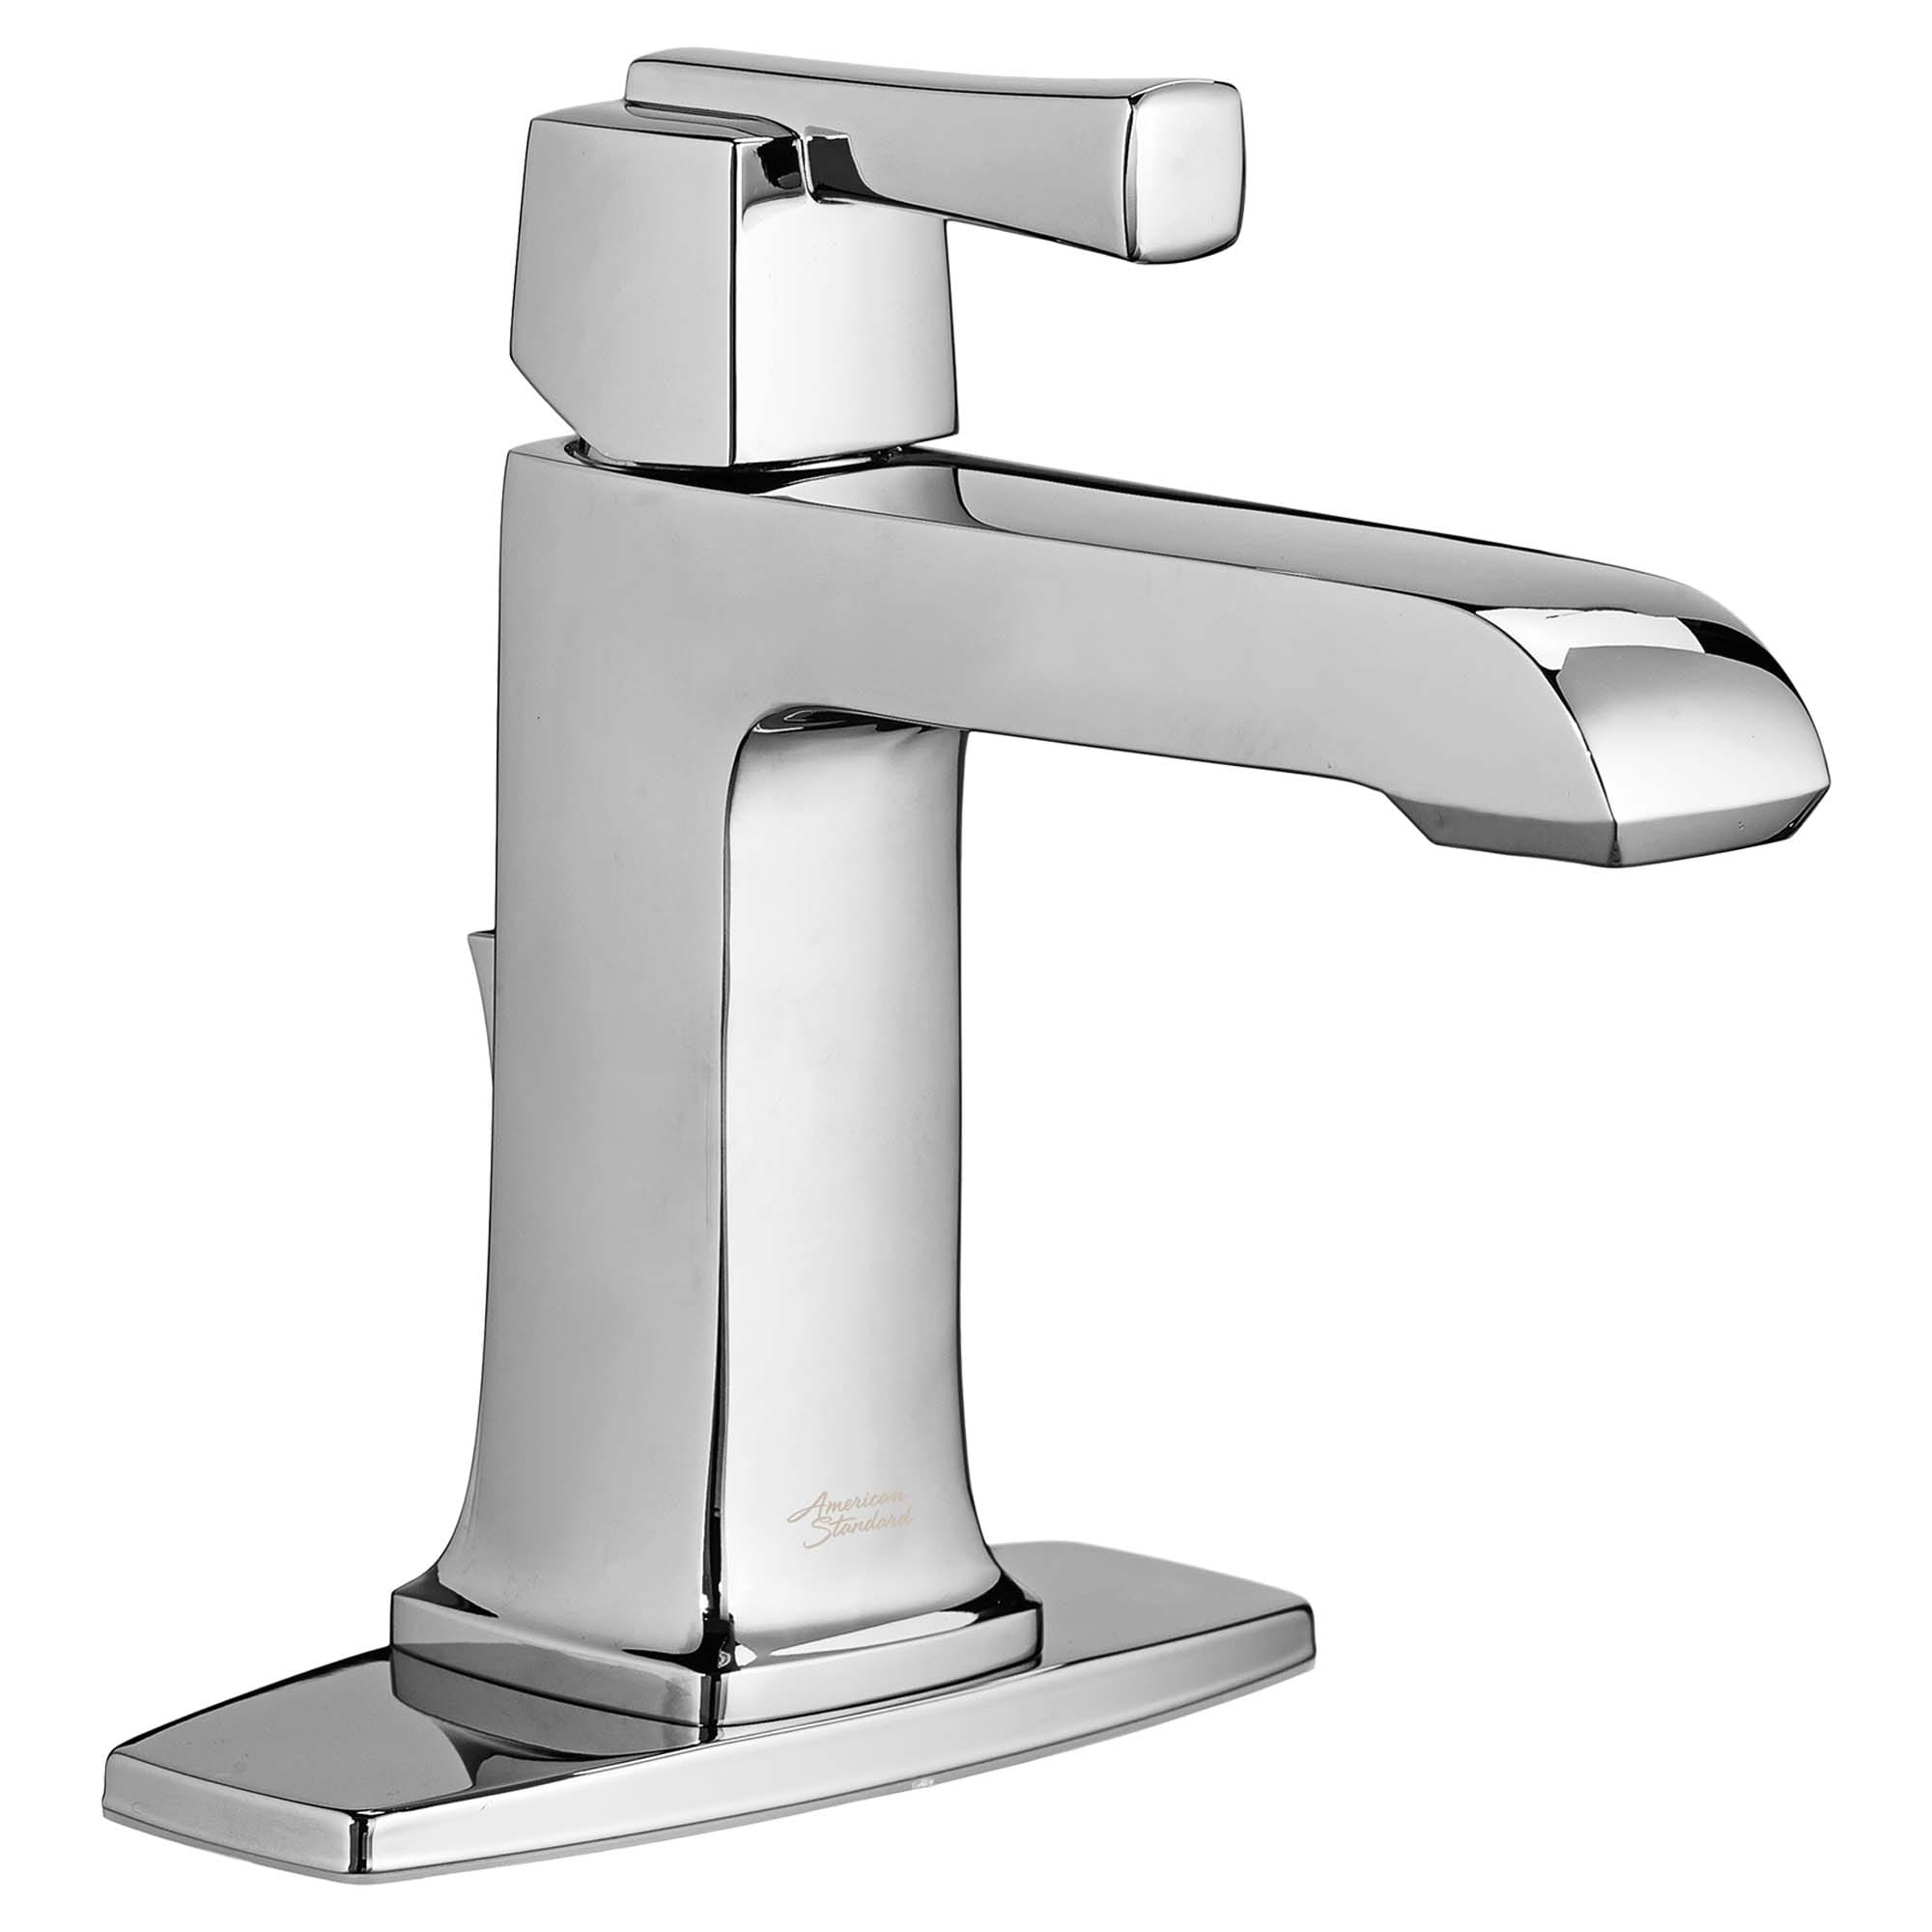 Townsend Single Hole Single Handle Bathroom Faucet 12 gpm 45 L min With Lever Handle CHROME